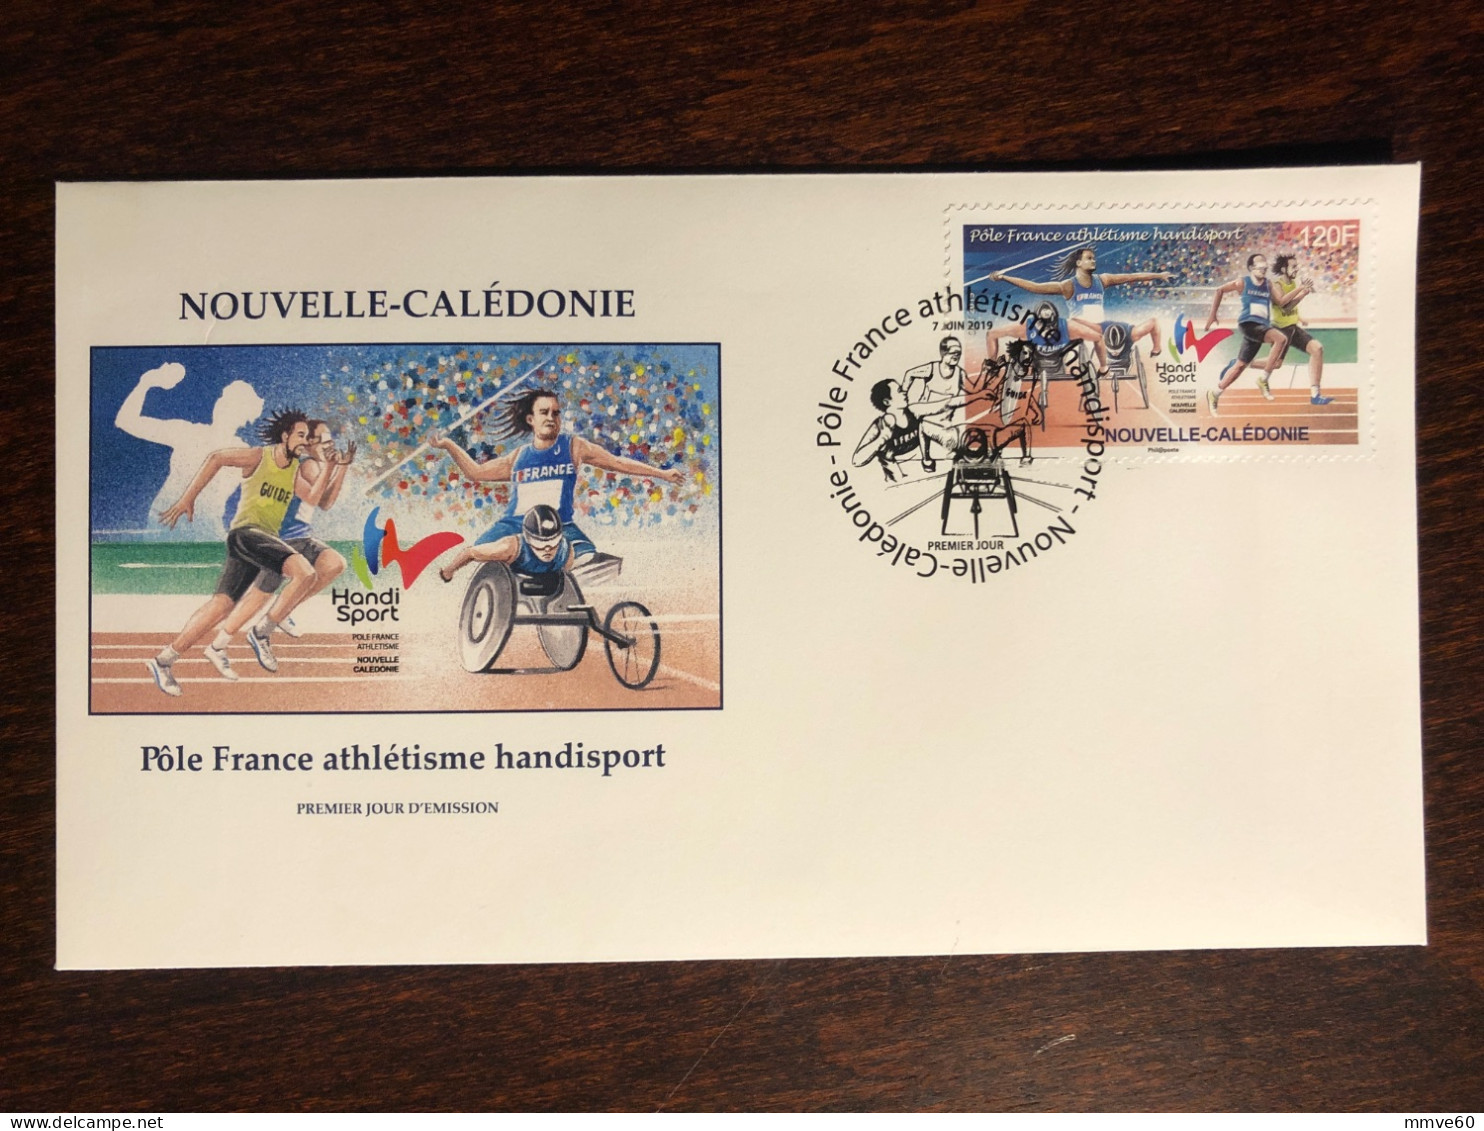 NEW CALEDONIA NOUVELLE CALEDONIE FDC COVER 2019 YEAR DISABLED IN SPORT PARALYMPICS HEALTH MEDICINE - Storia Postale